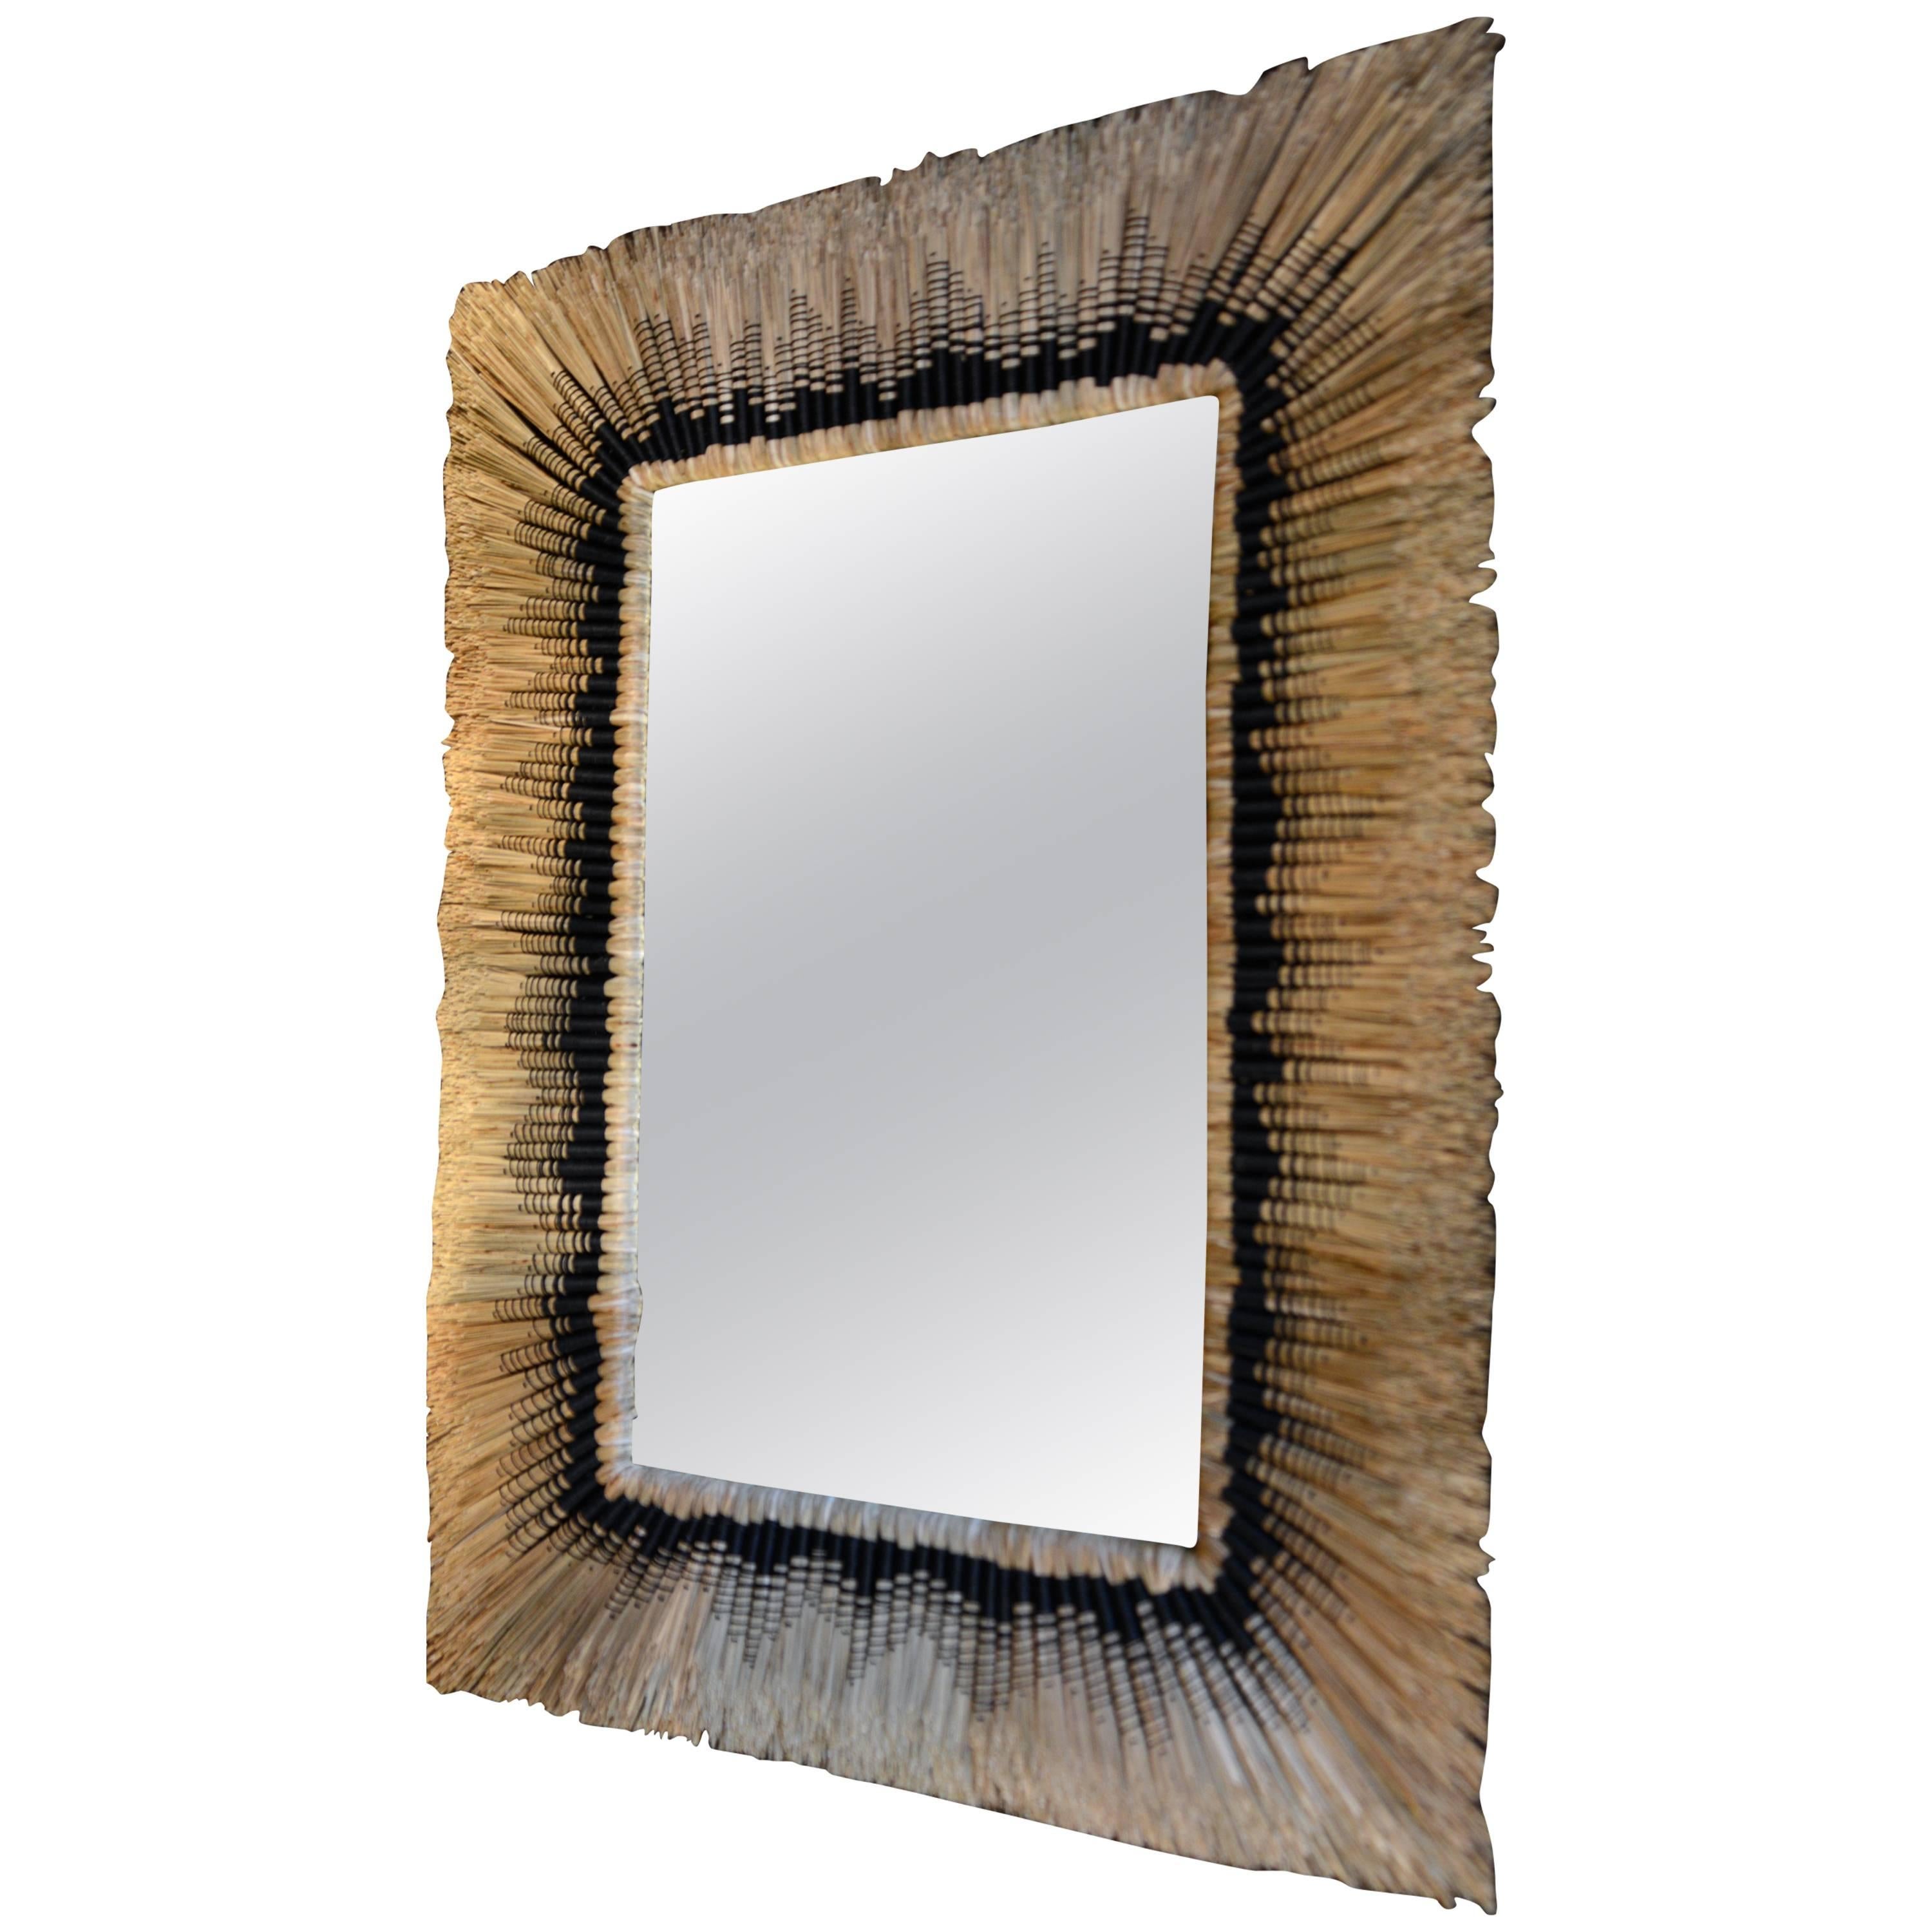 Very Atypical Straw Mirror, France, Contemporary Work For Sale